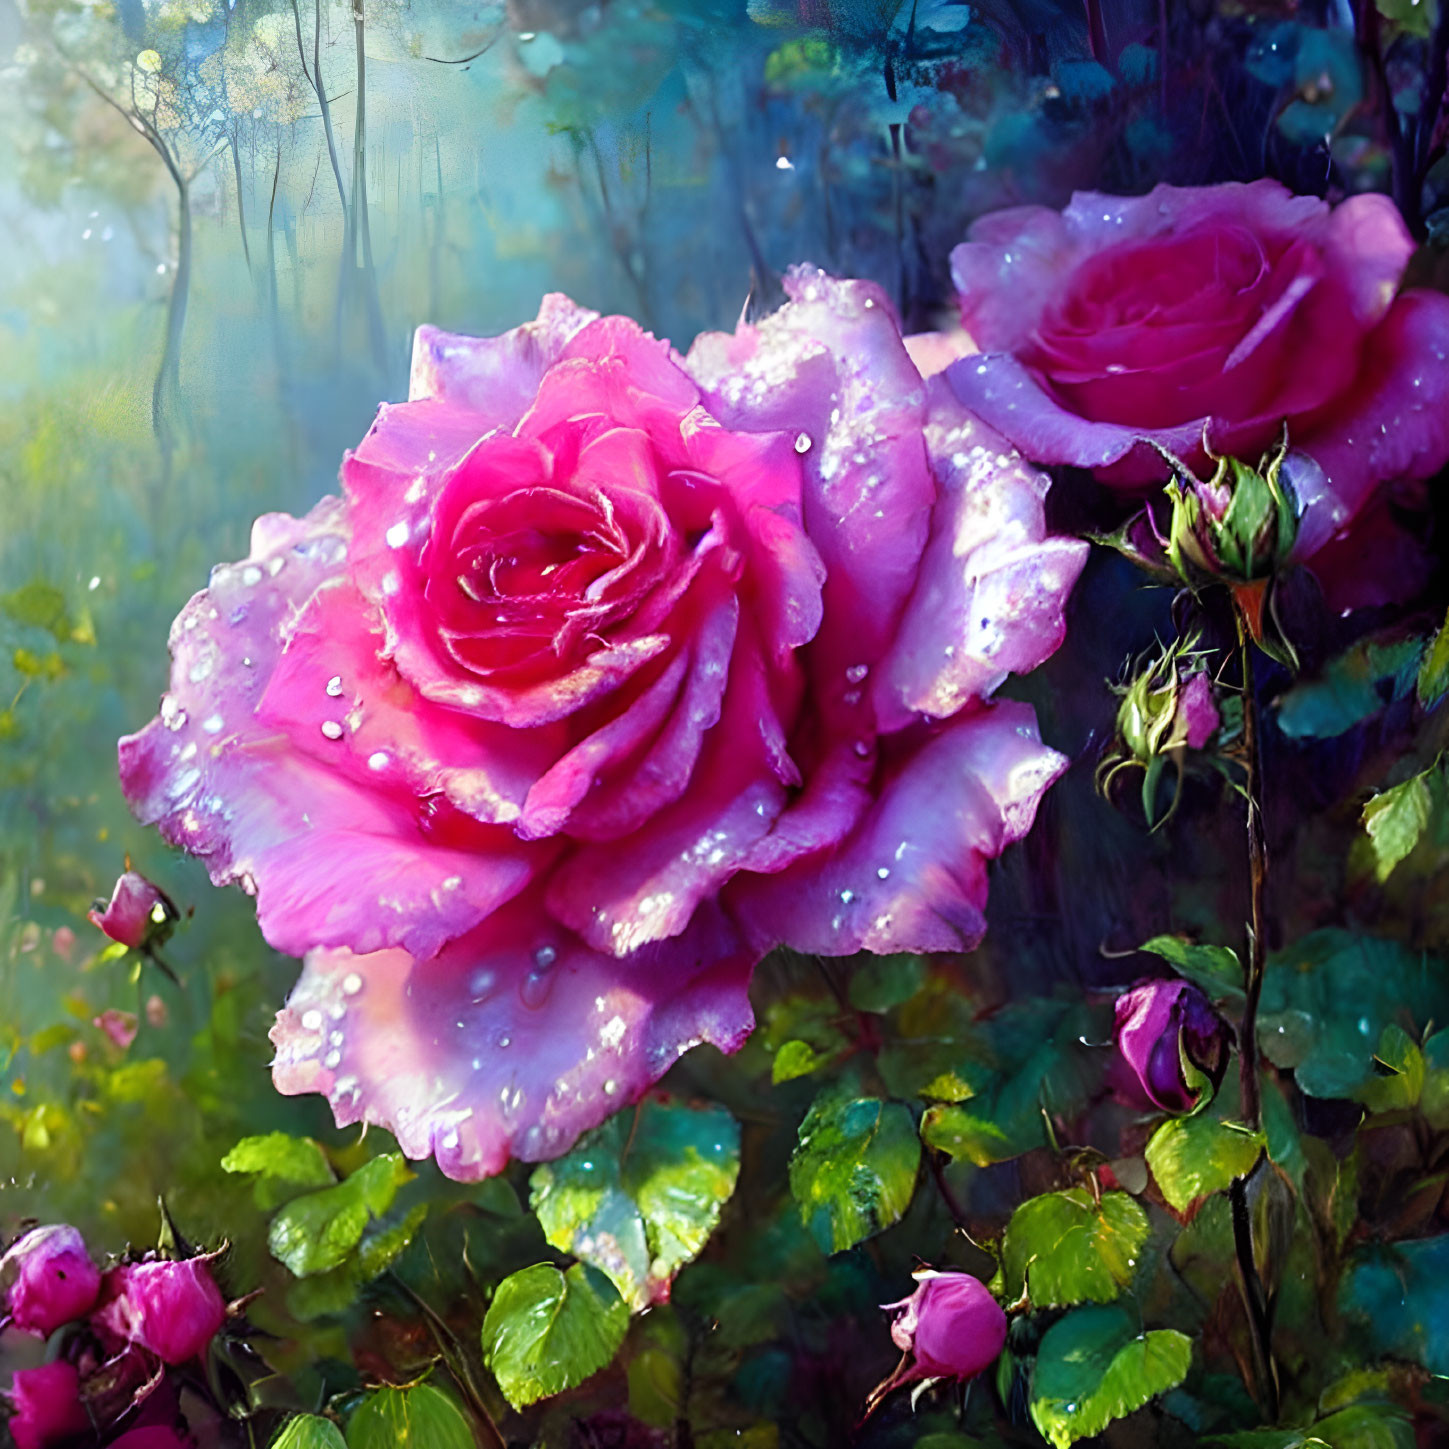 Pink rose with dewdrops in misty forest scene